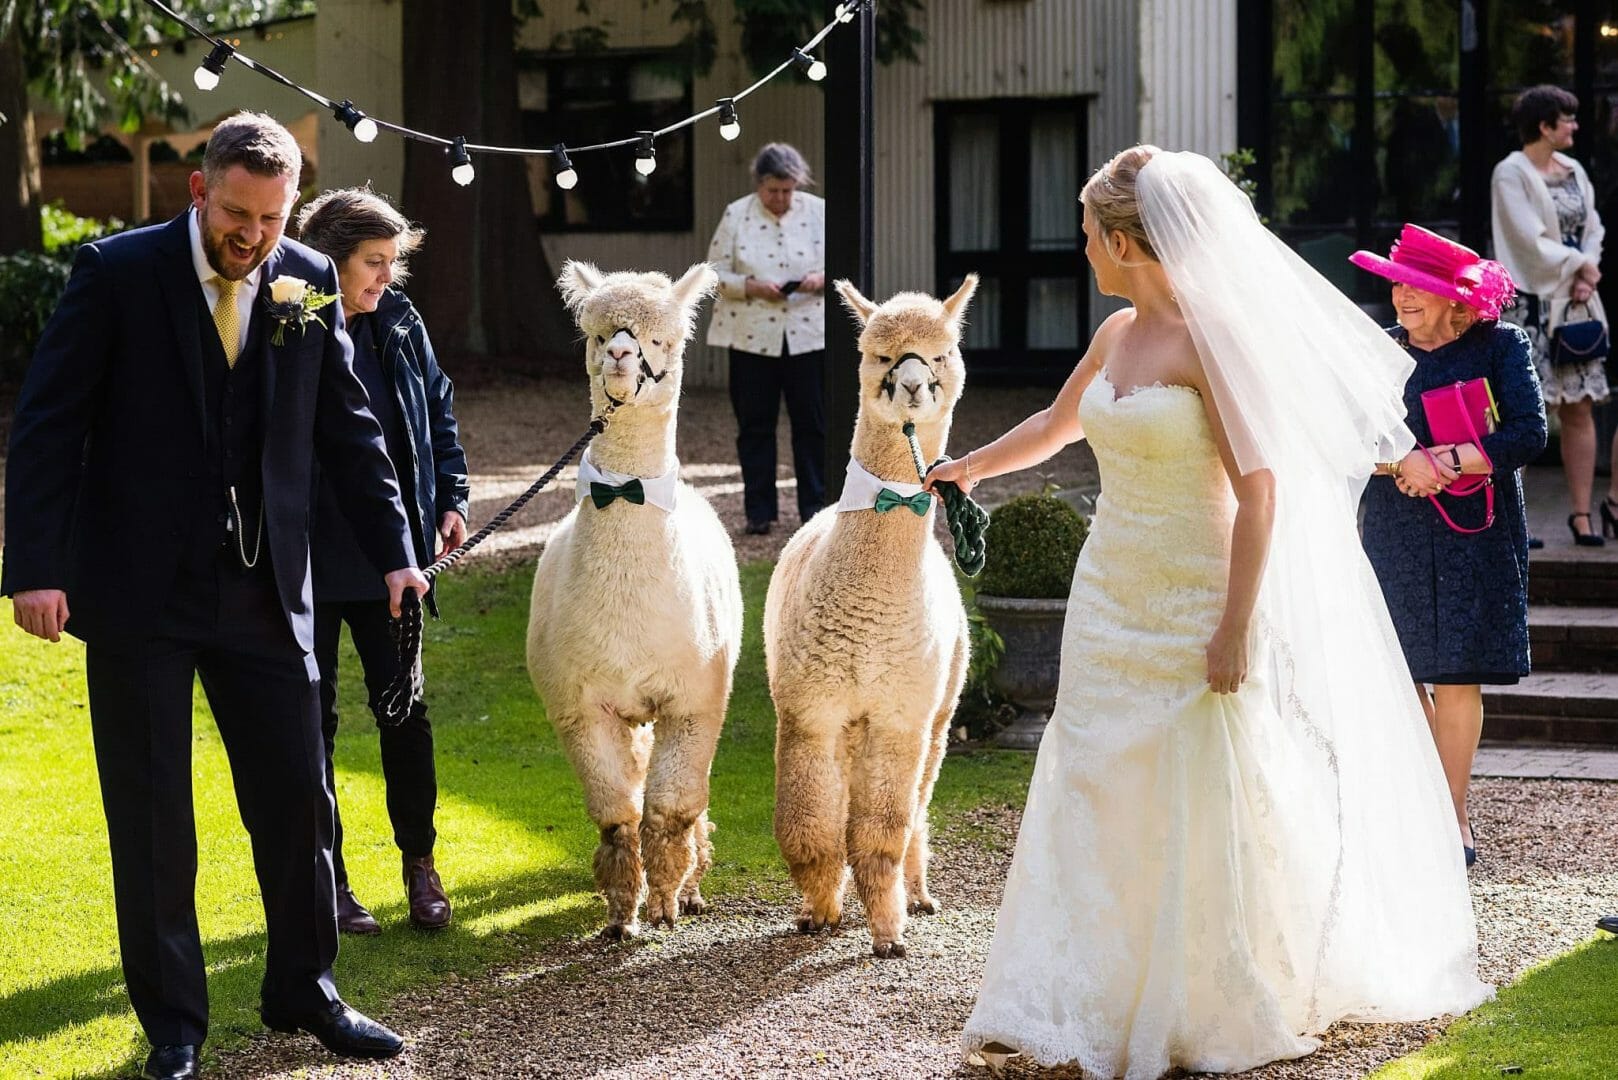 Bride and Groom lead the Alpaca out of the wedding ceremony